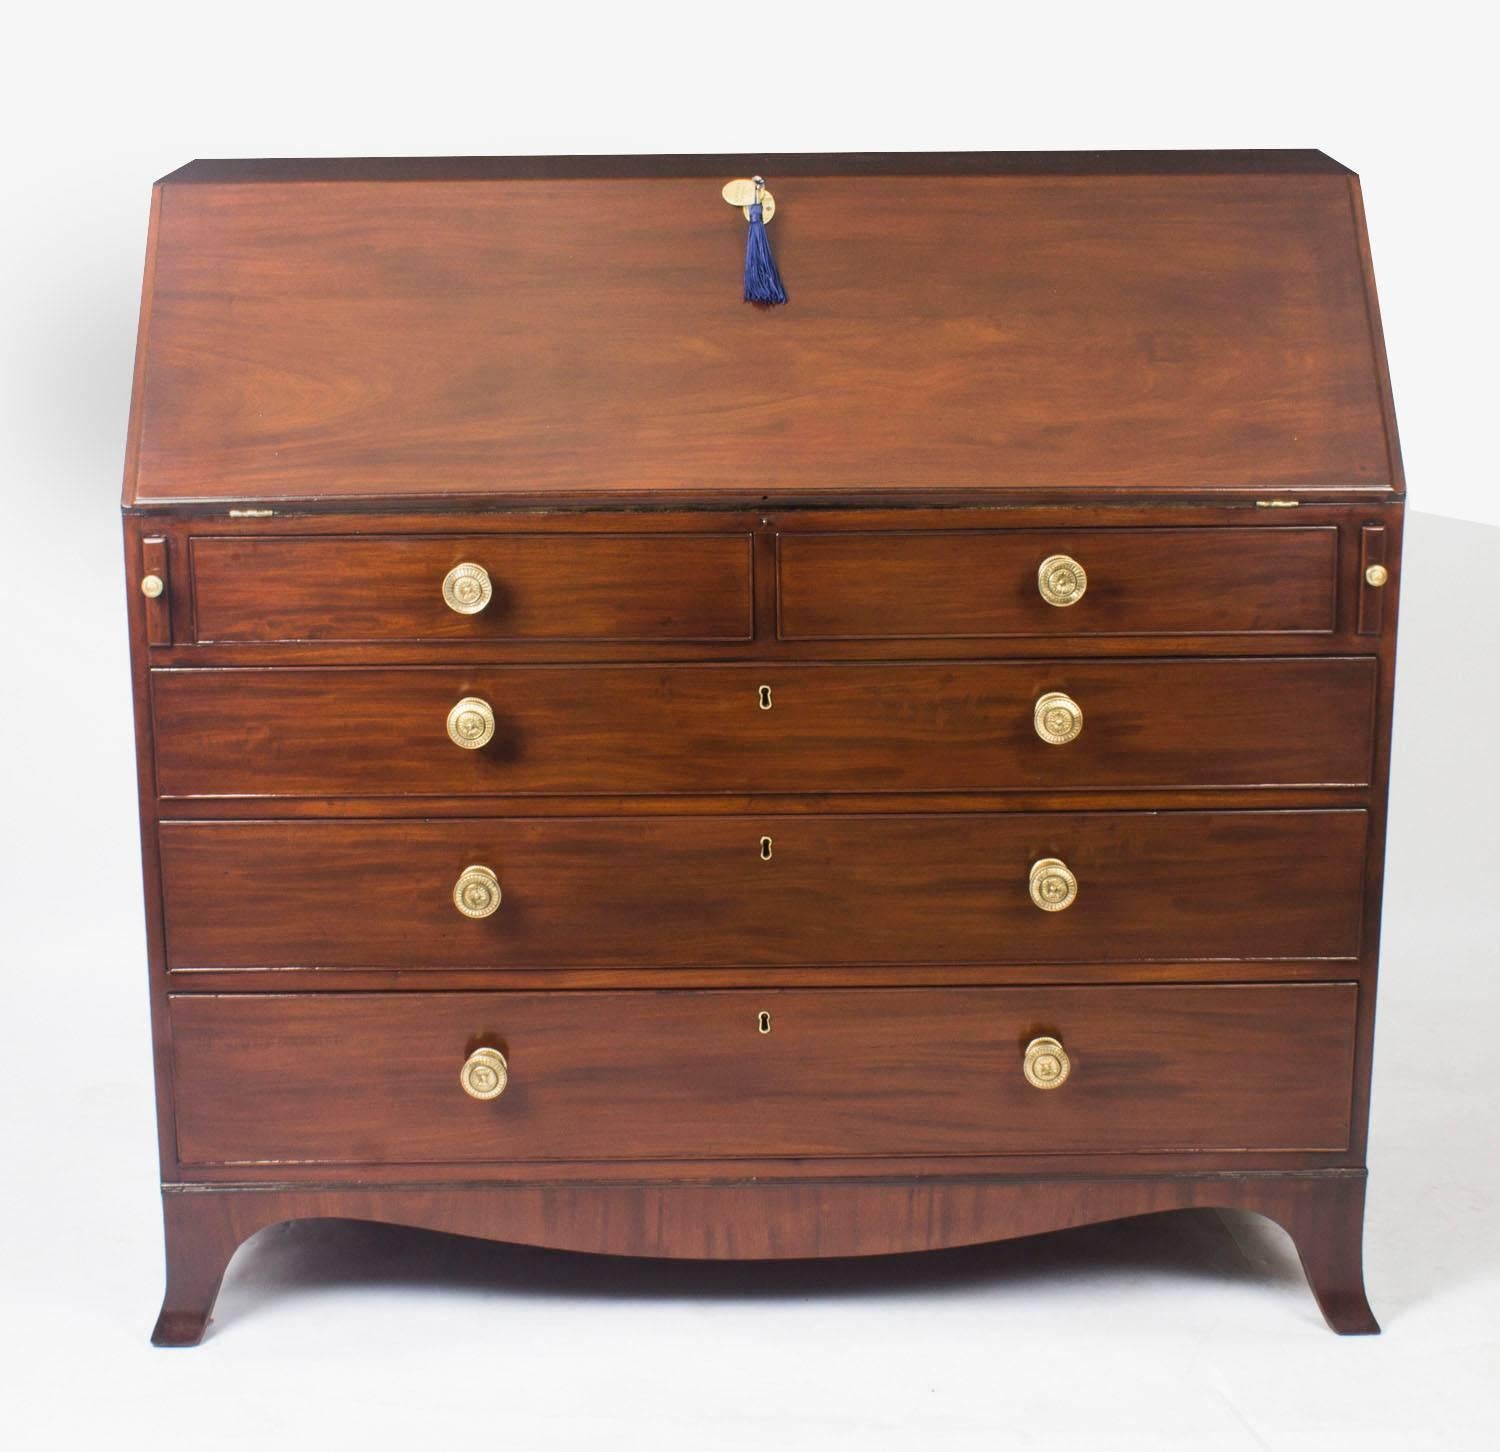 This antique bureau is late 18th century in date and has been beautifully crafted from top quality flame mahogany. The design is quite simple yet it has managed to make maximum use of the fine grain of the mahogany which is beautiful and has a